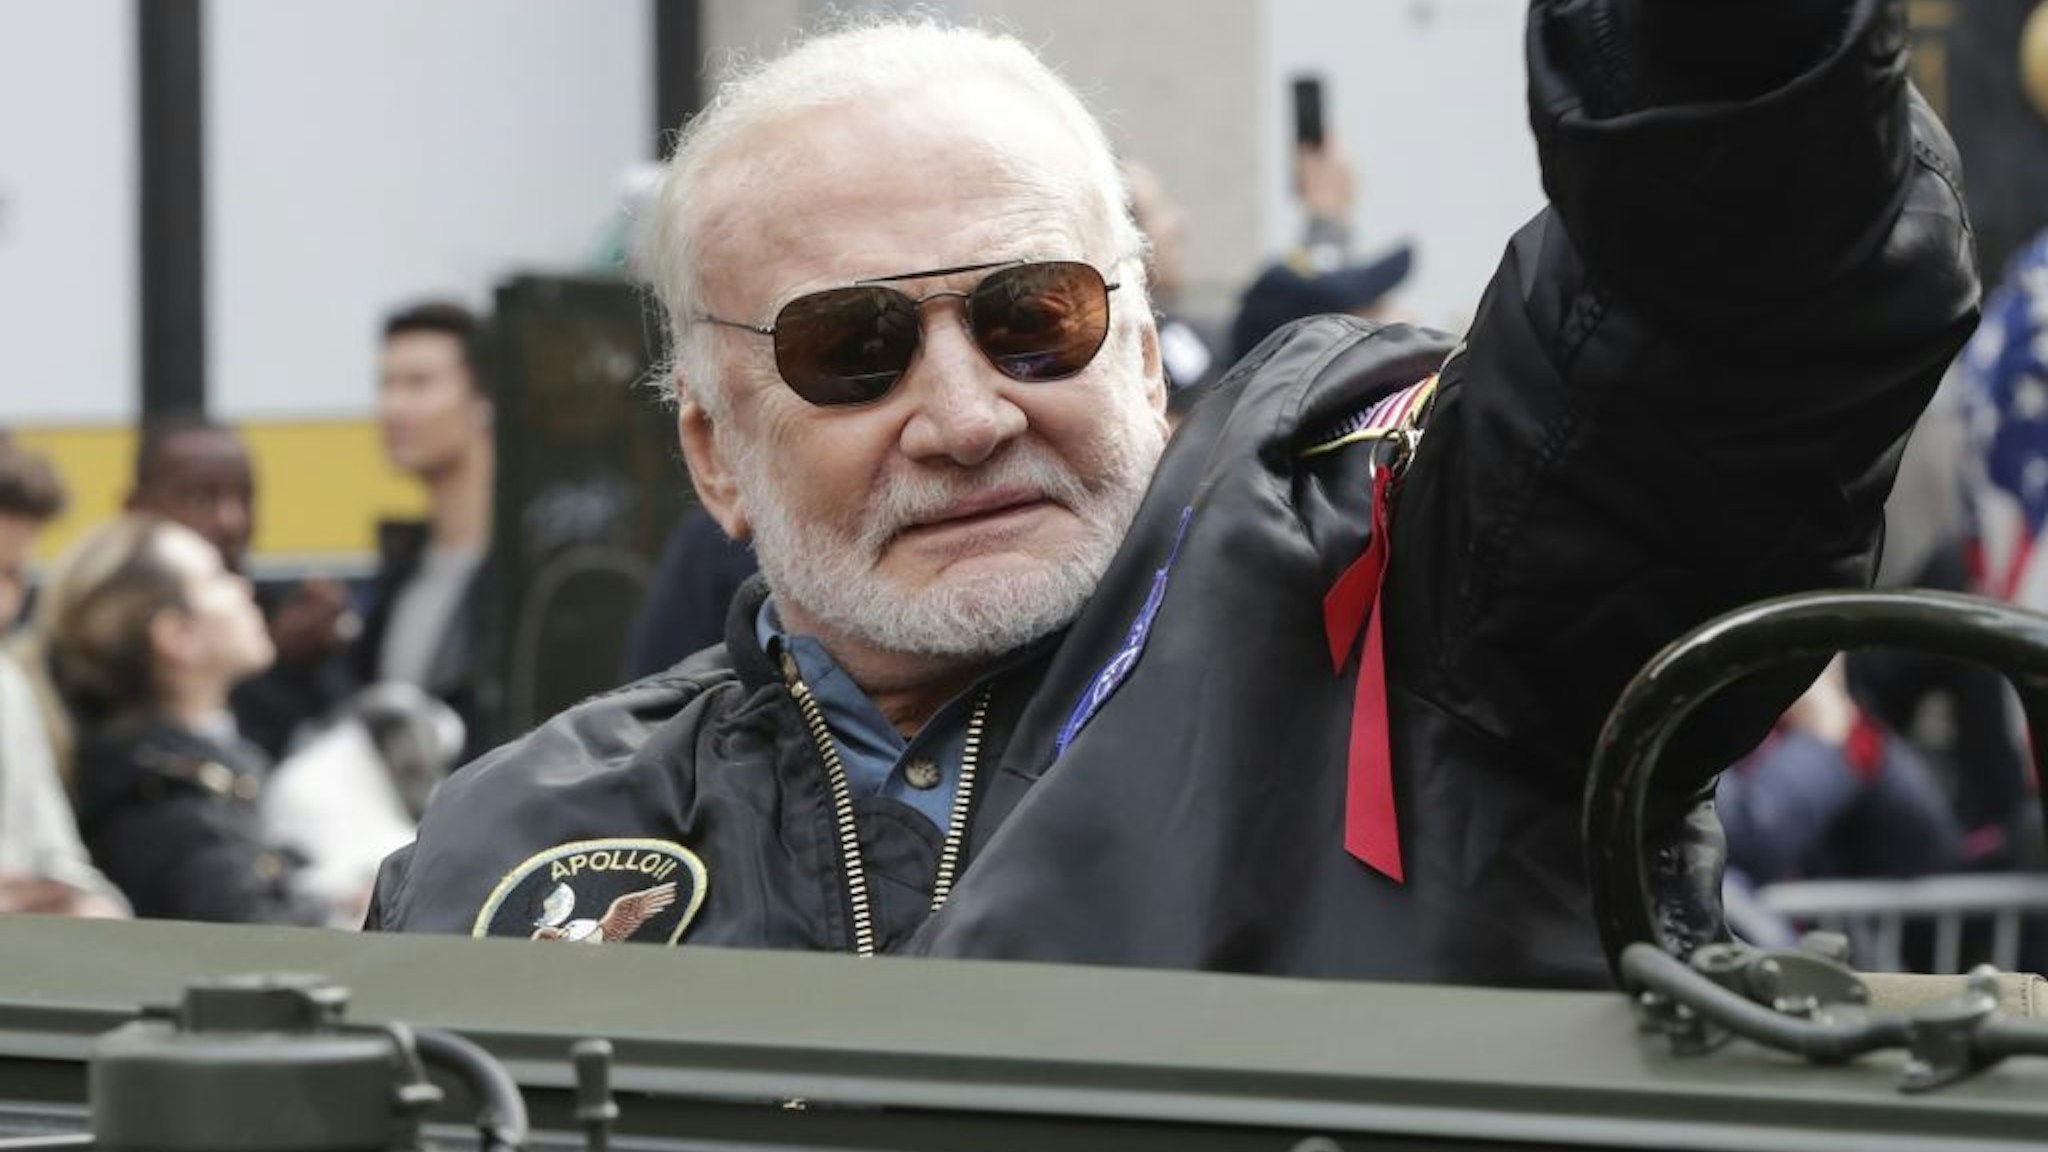 Buzz Aldrin, Apollo 11 astronaut, during a parade to celebrate Veterans' Day on Fifth Avenue in New York City, November 11, 2019. (Photo by EuropaNewswire/Gado/Getty Images)